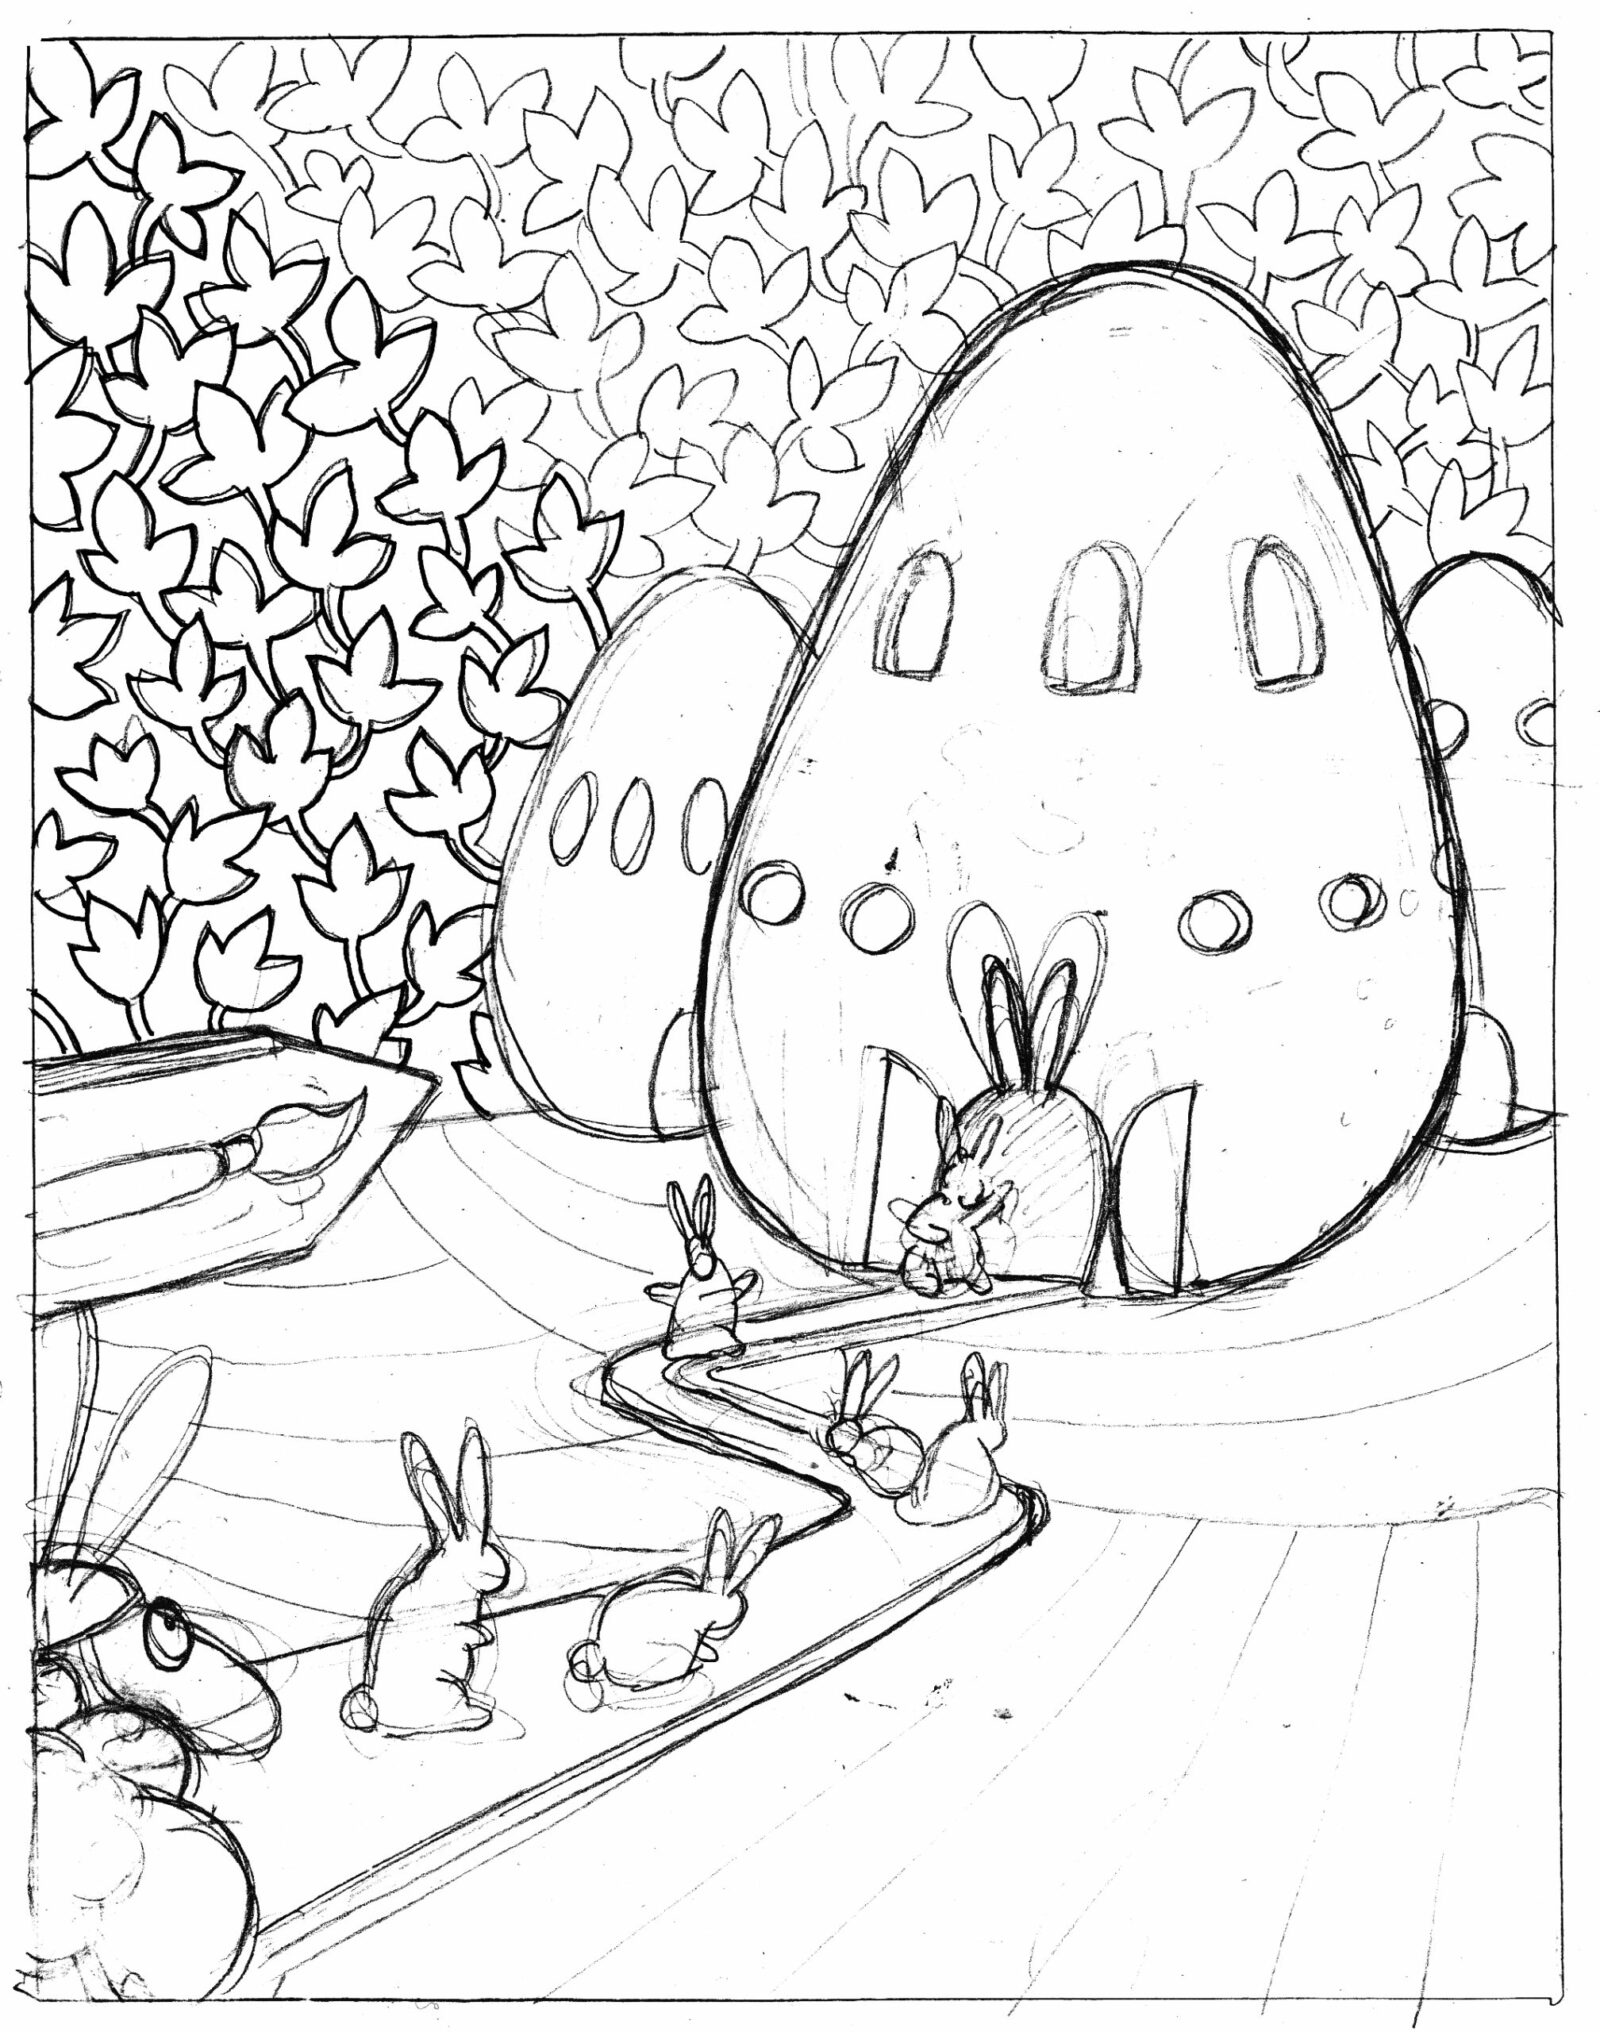 Sketch for the Easter Bunny School